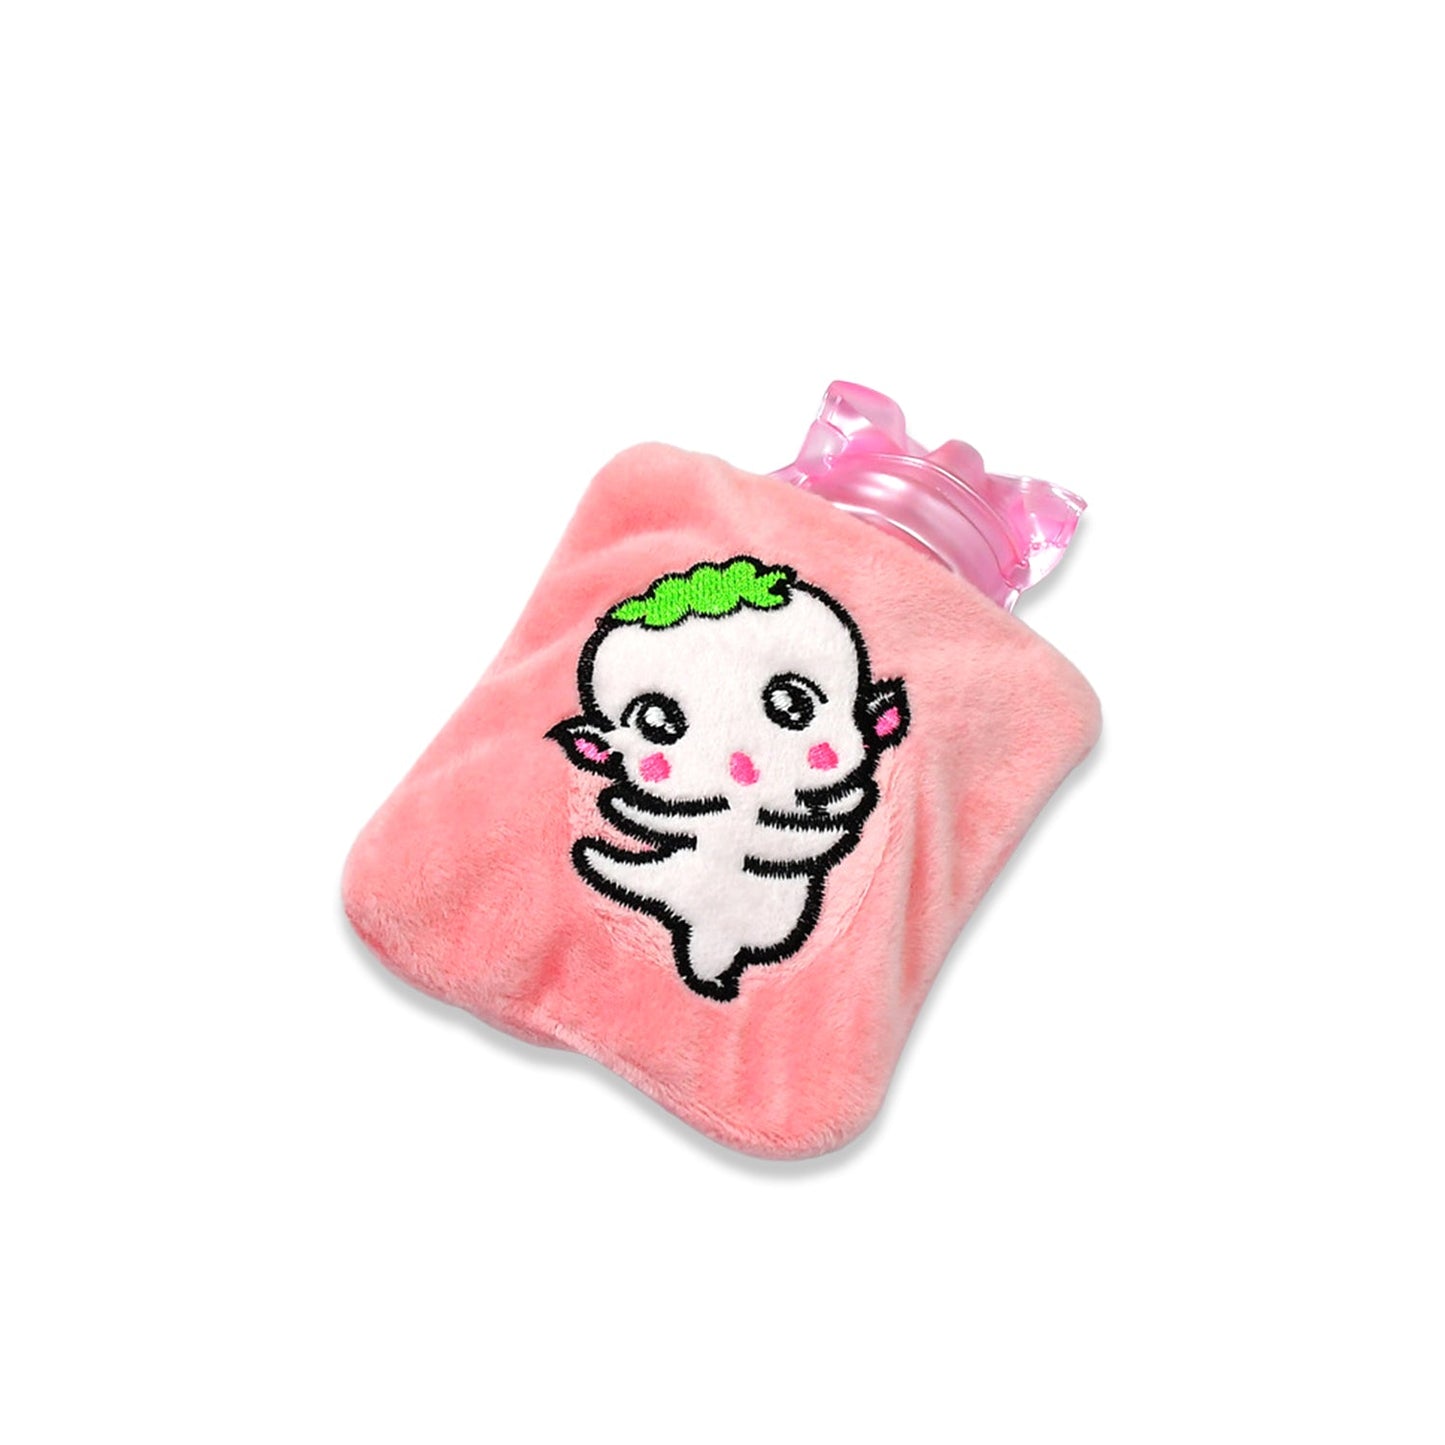 6532 Pink Cartoon small Hot Water Bag with Cover for Pain Relief, Neck, Shoulder Pain and Hand, Feet Warmer, Menstrual Cramps. DeoDap